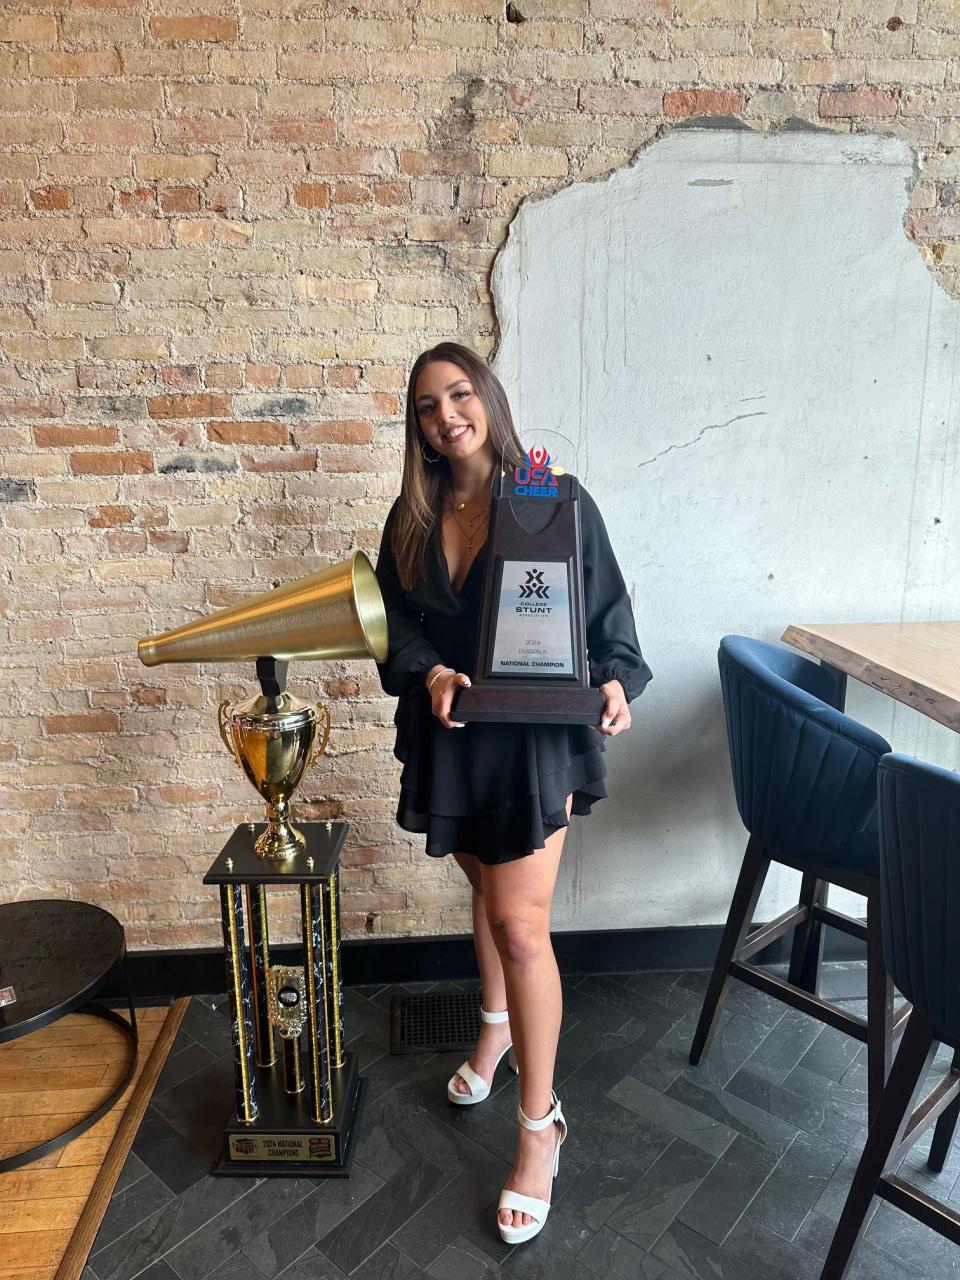 Former Gaylord cheer captain Fayth Sanom was part of the fourth consecutive national championship victories for both Alma Cheer and Alma Stunt during her freshman season.